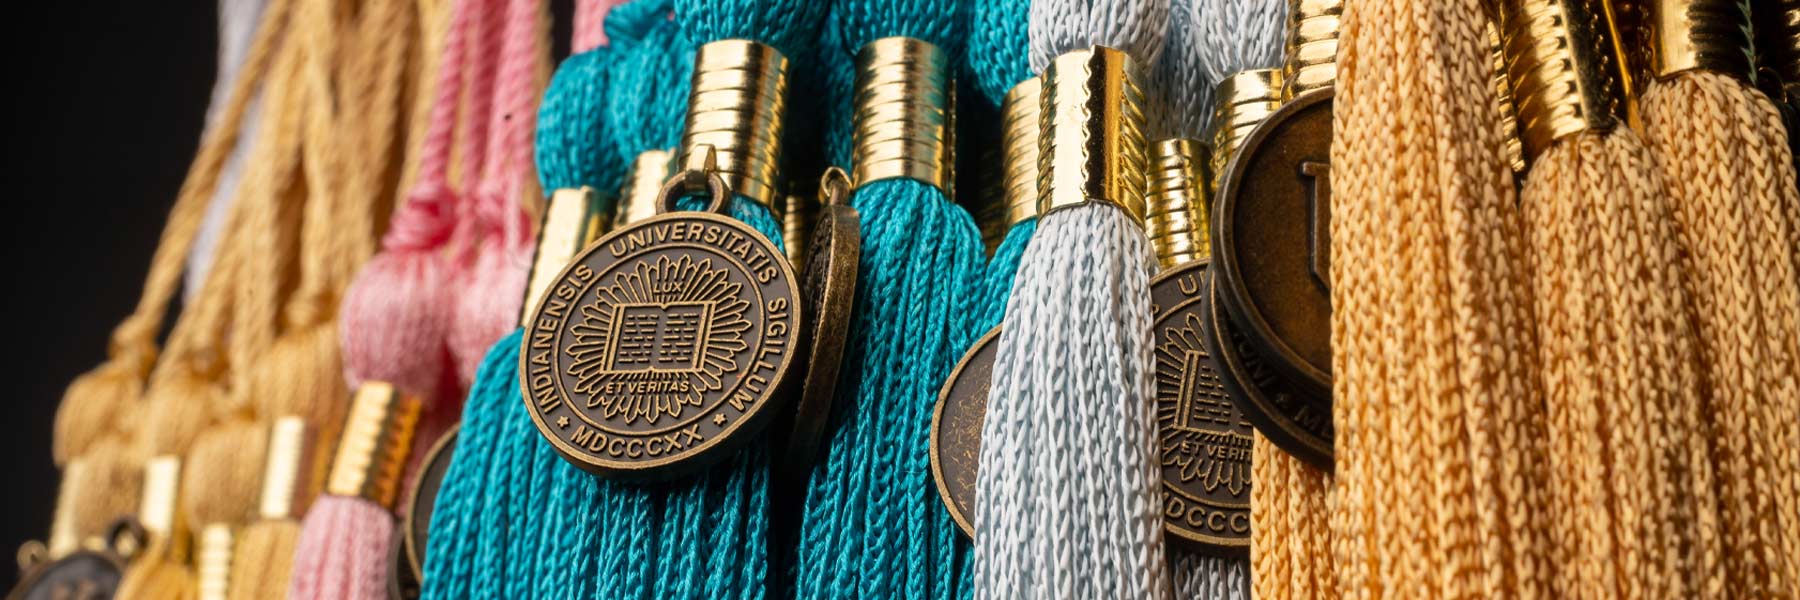 A brightly colored collection of tassels hang together in a row of turquoise, pink, bronze, gold, yellow, and blue.